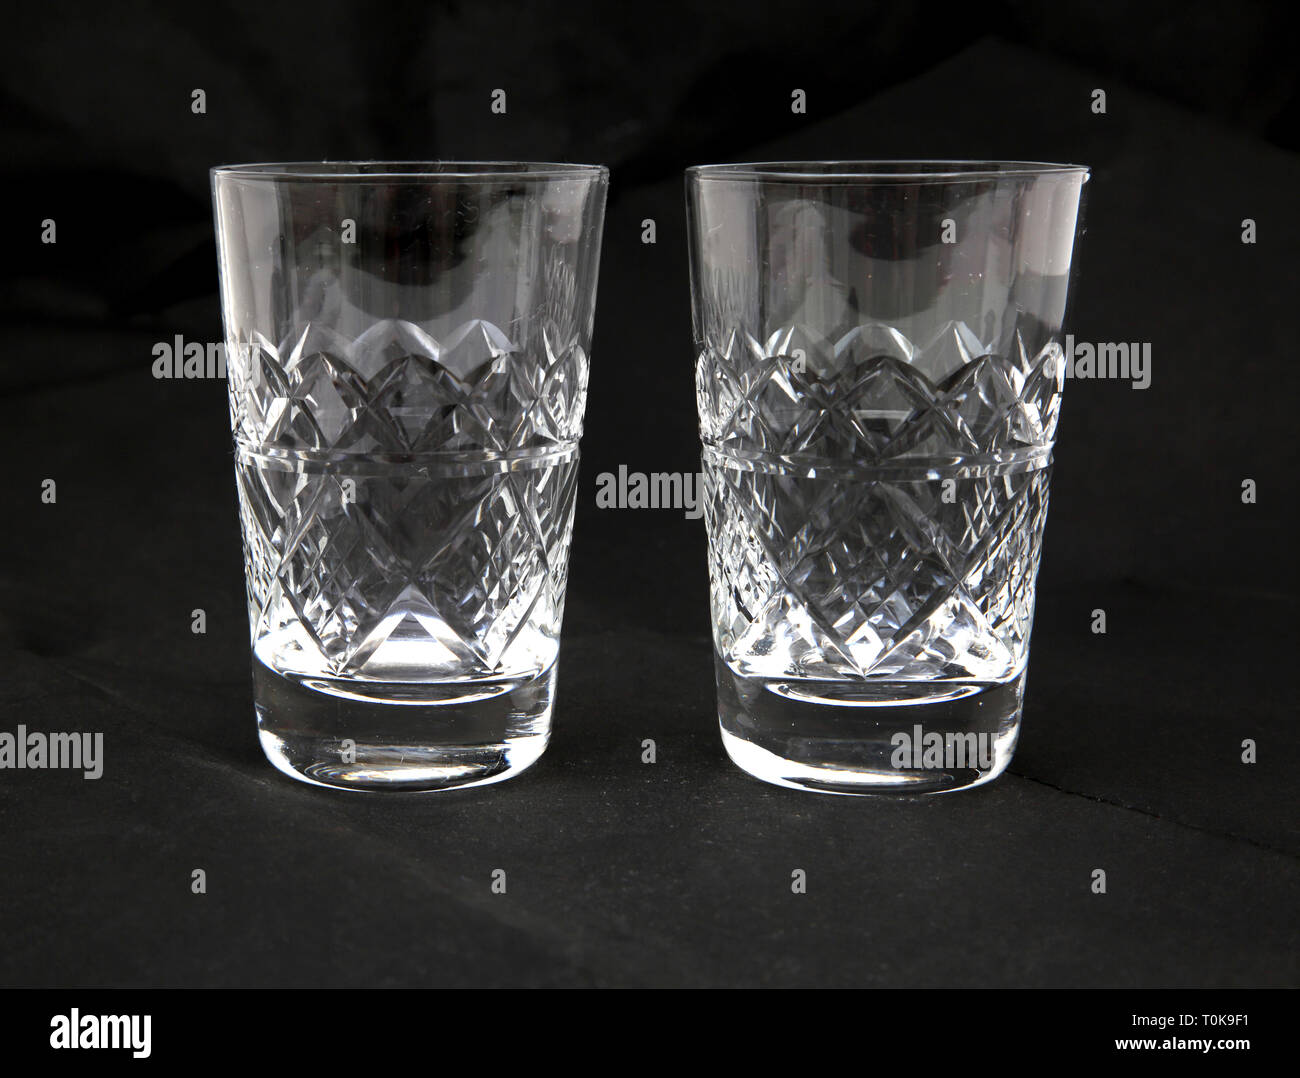 A Pair of Cut Crystal Tumbler Glasses Stock Photo